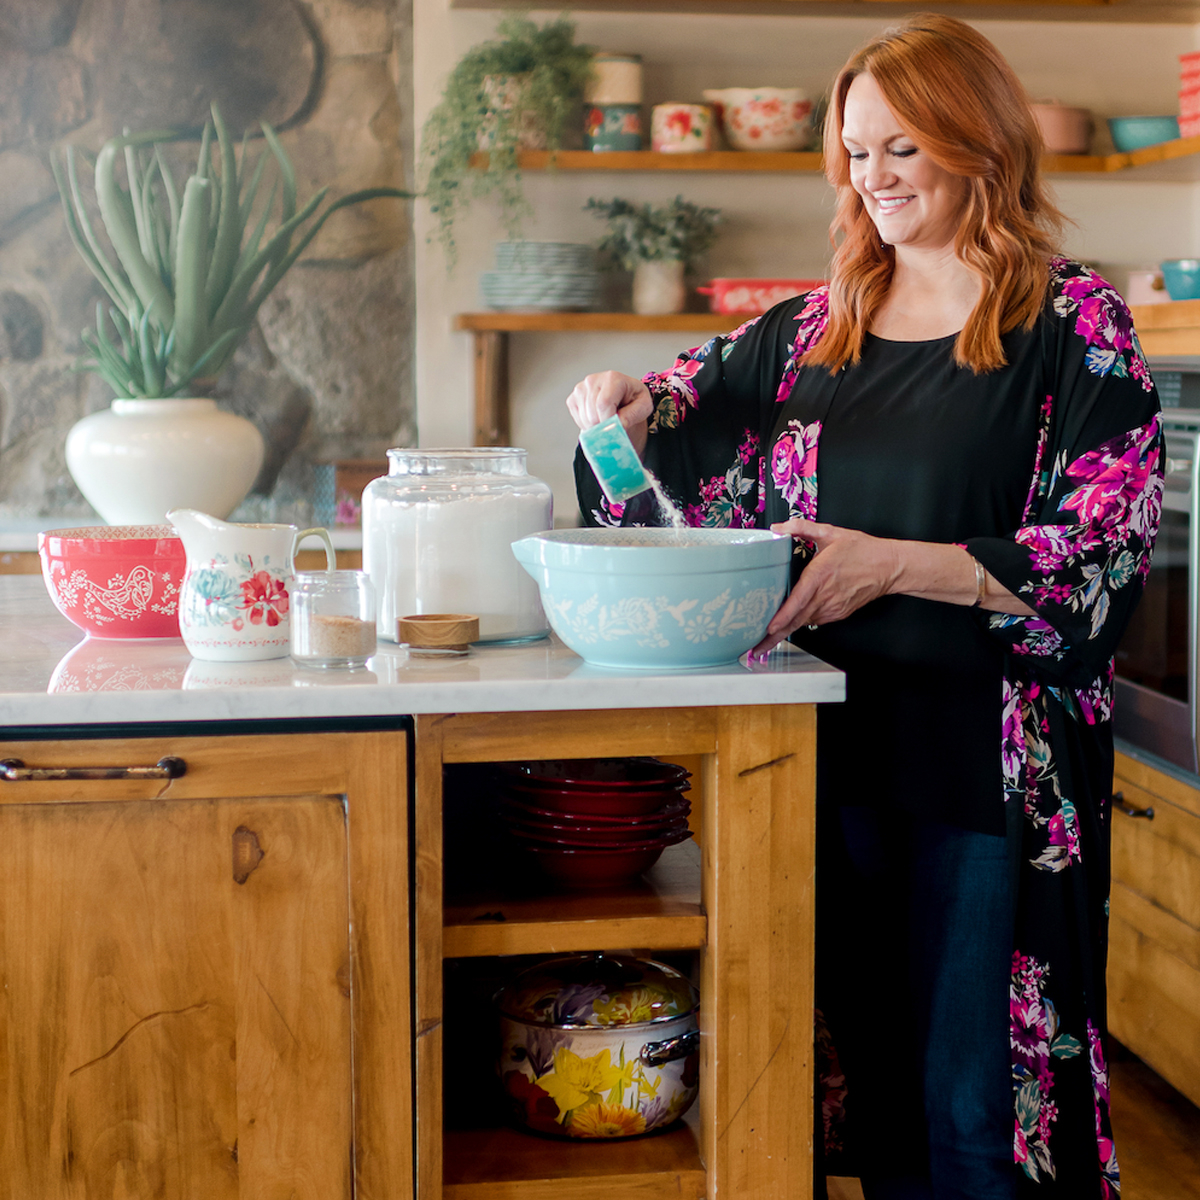 Walmart and The Pioneer Woman, Ree Drummond, serve up style with new  clothing drop